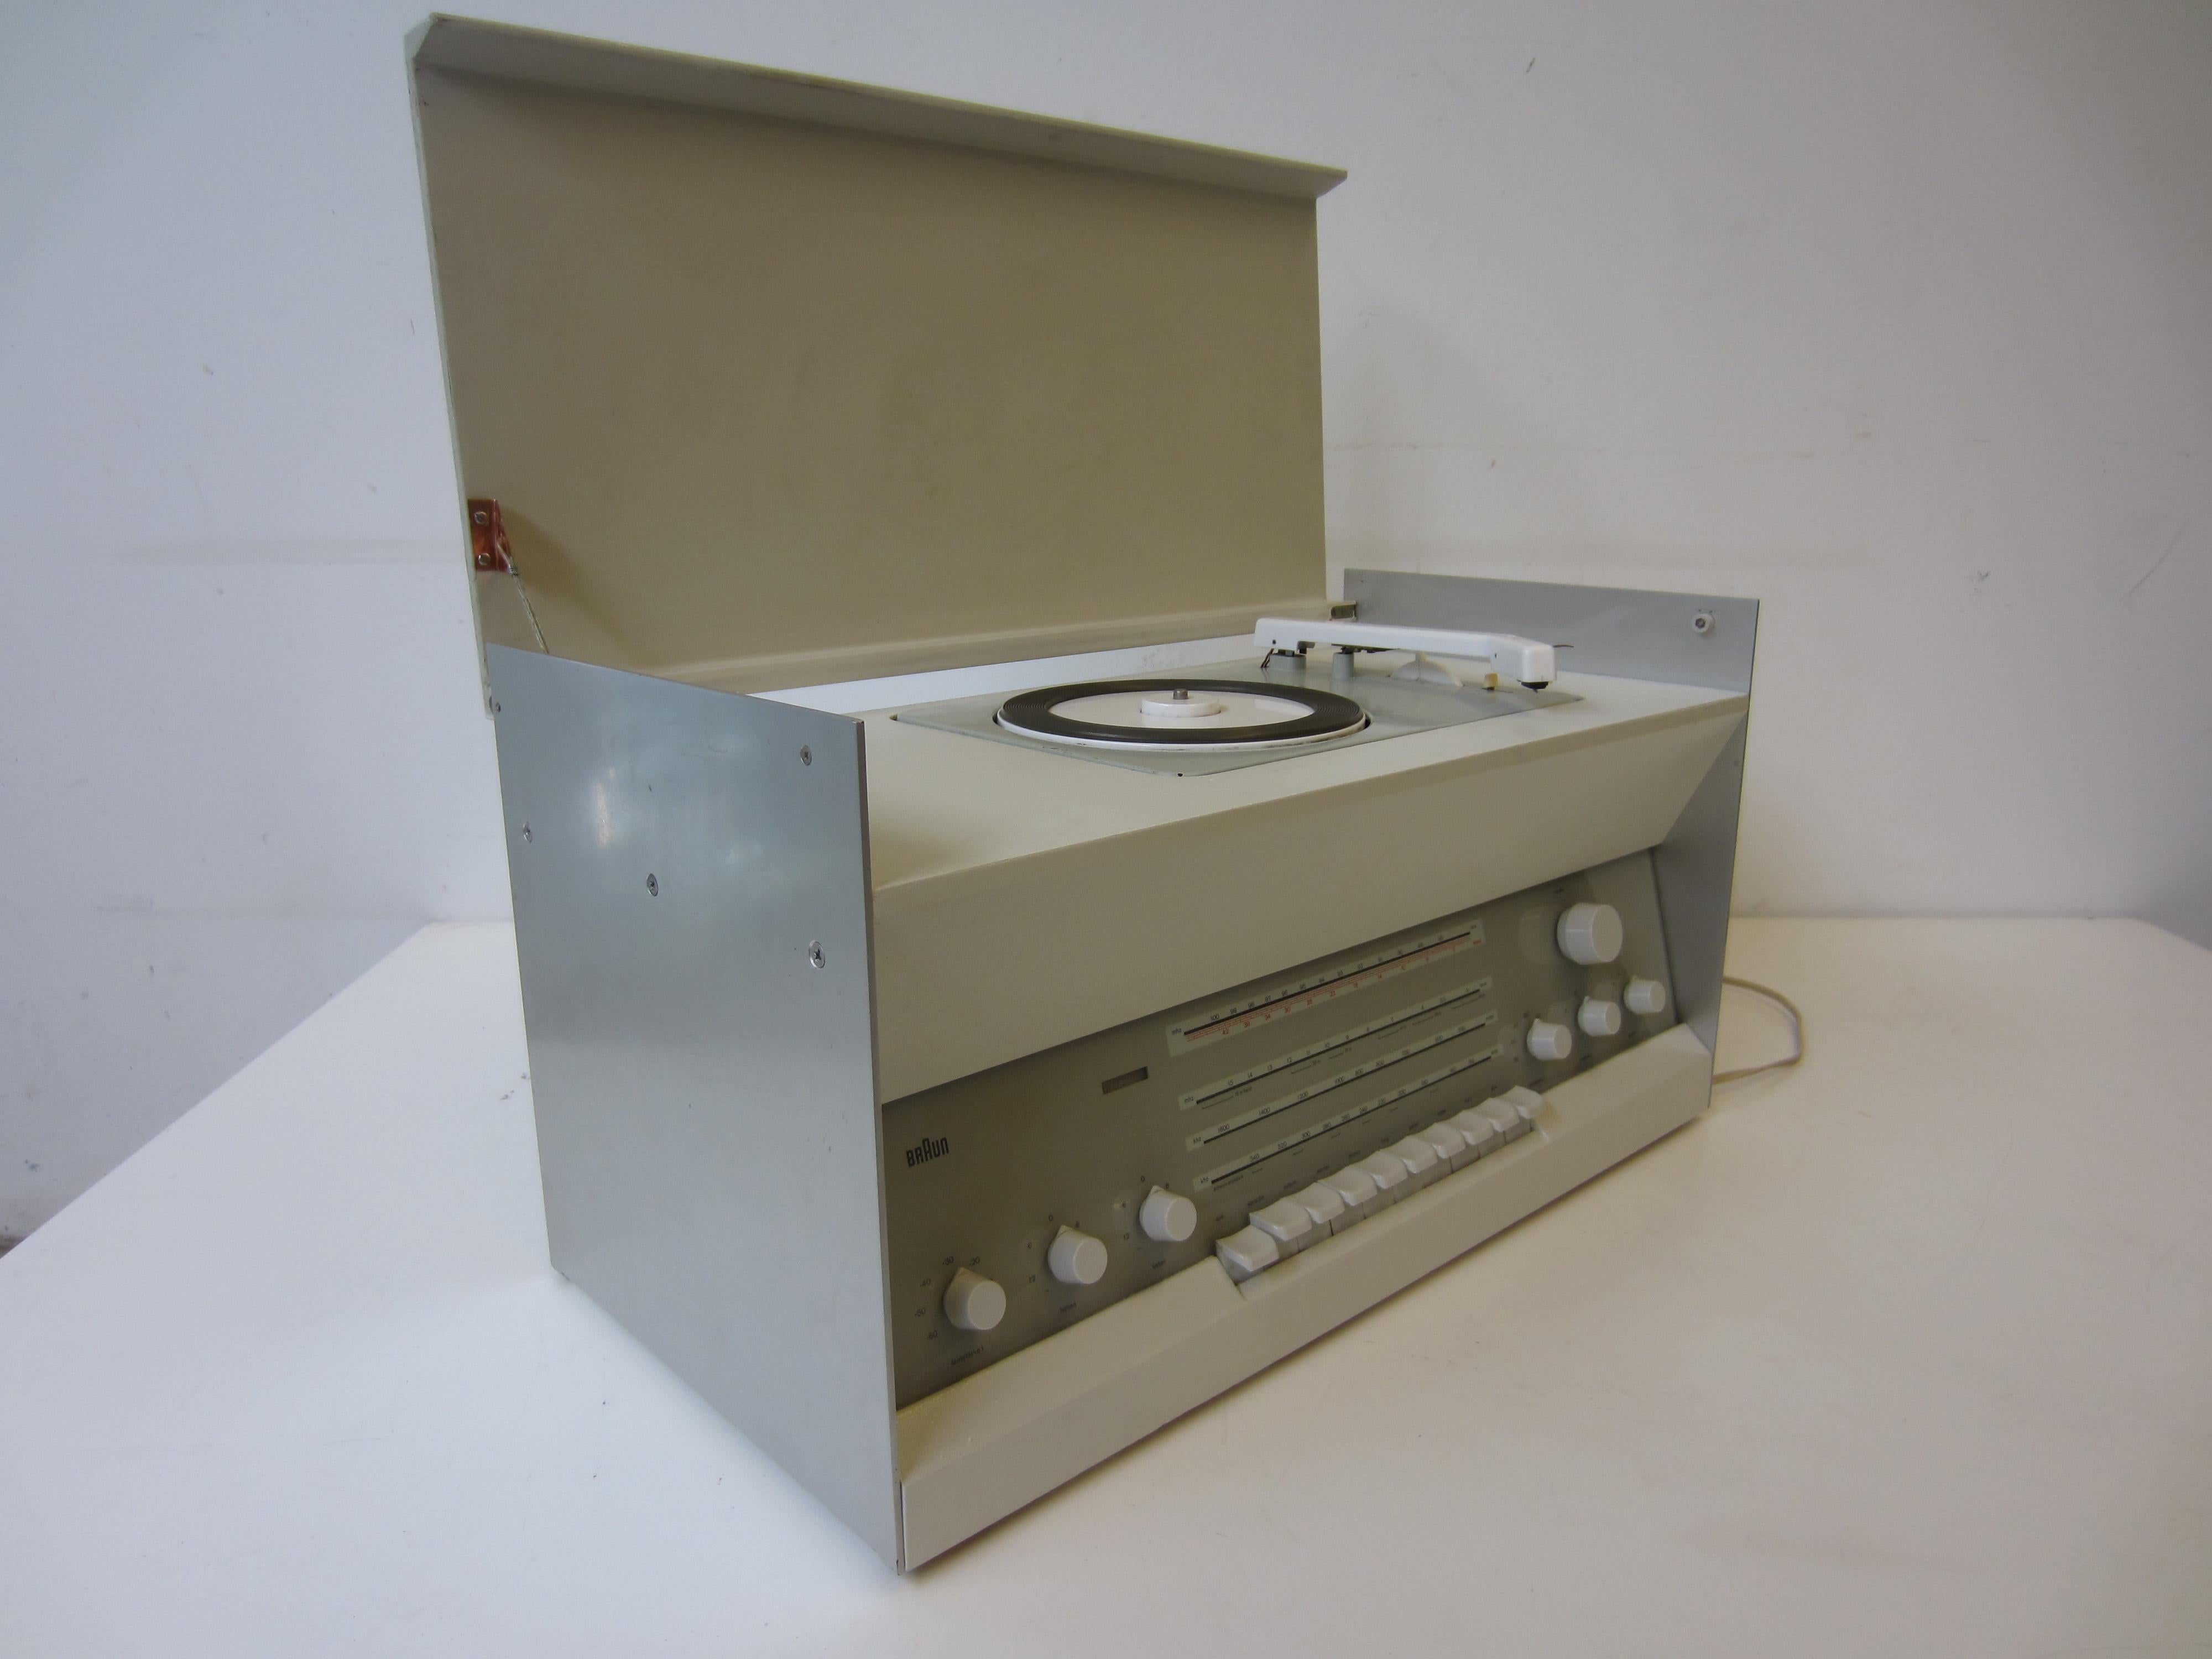 German Atelier 3 Turntable and Radio by Dieter Rams for Braun, 1969